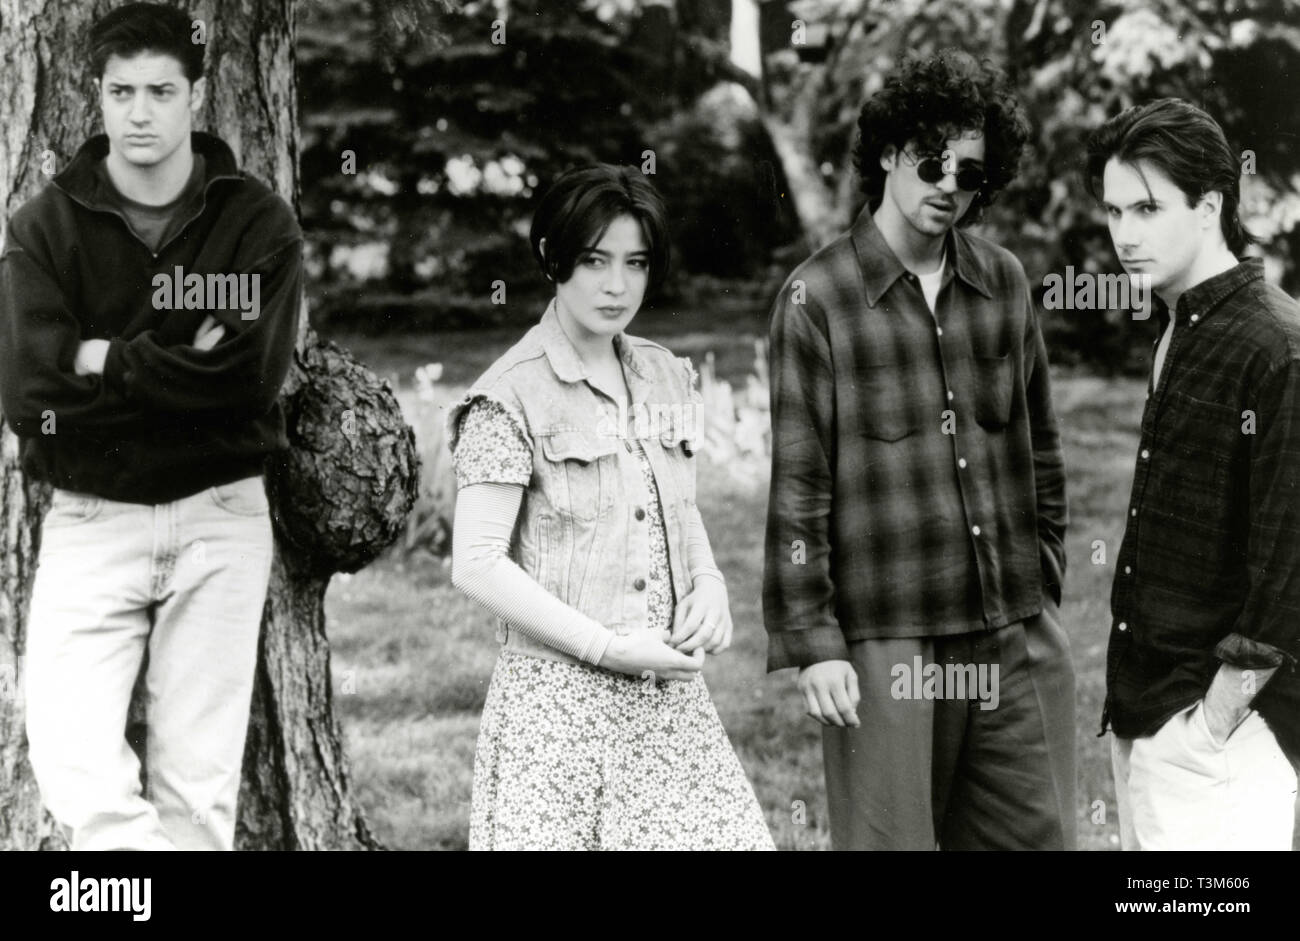 Brendan Fraser, Moira Kelly, Patrick Dempsey, and Josh Hamilton in the movie With Onors, 1994 Stock Photo